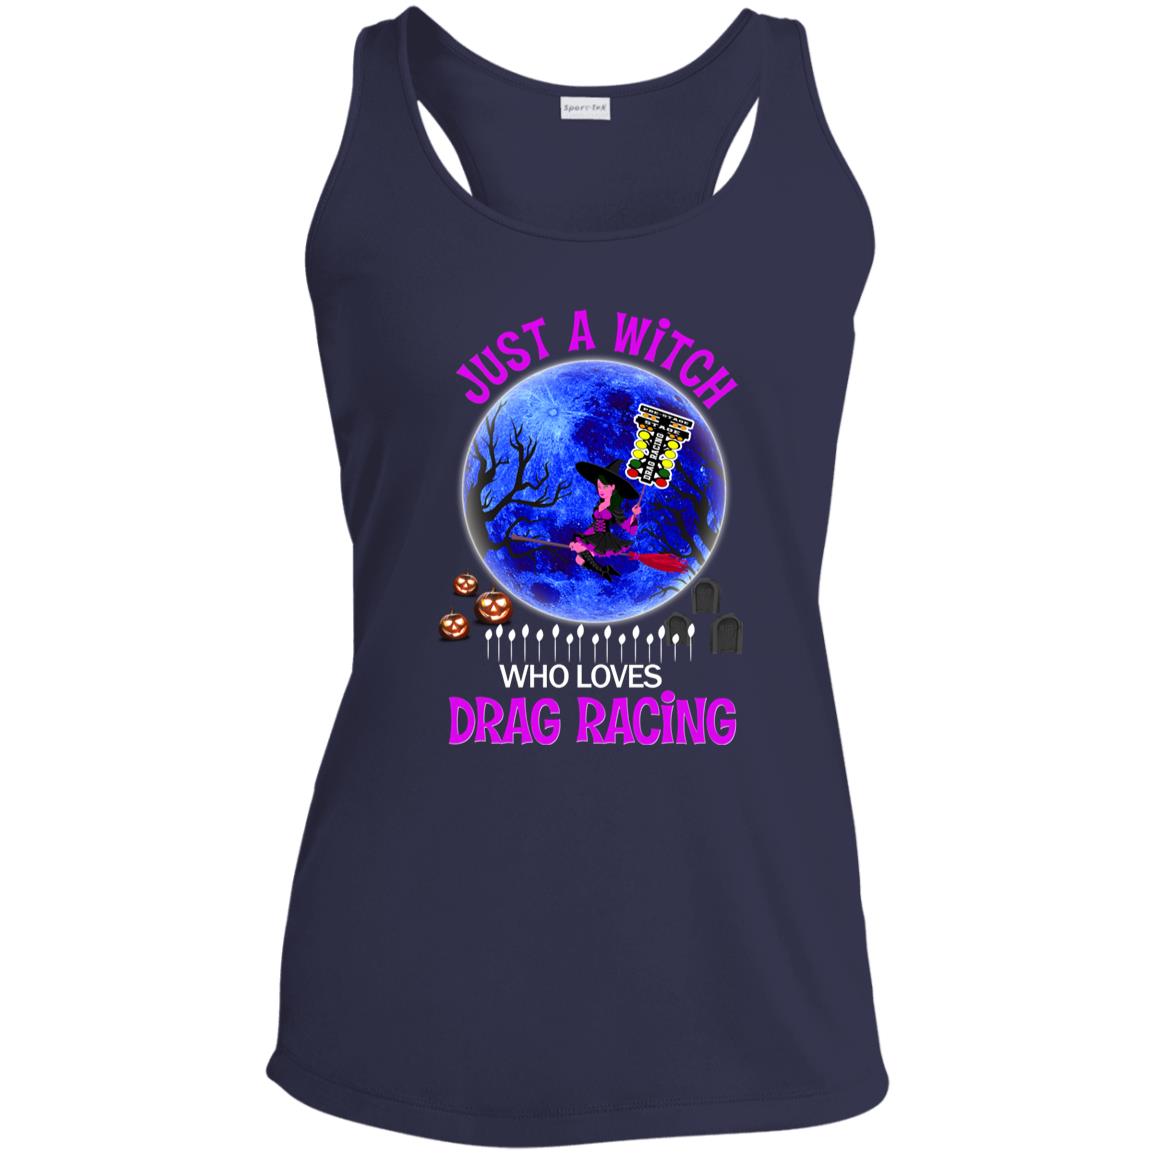 Just A Witch Who Loves Drag Racing Ladies' Performance Racerback Tank